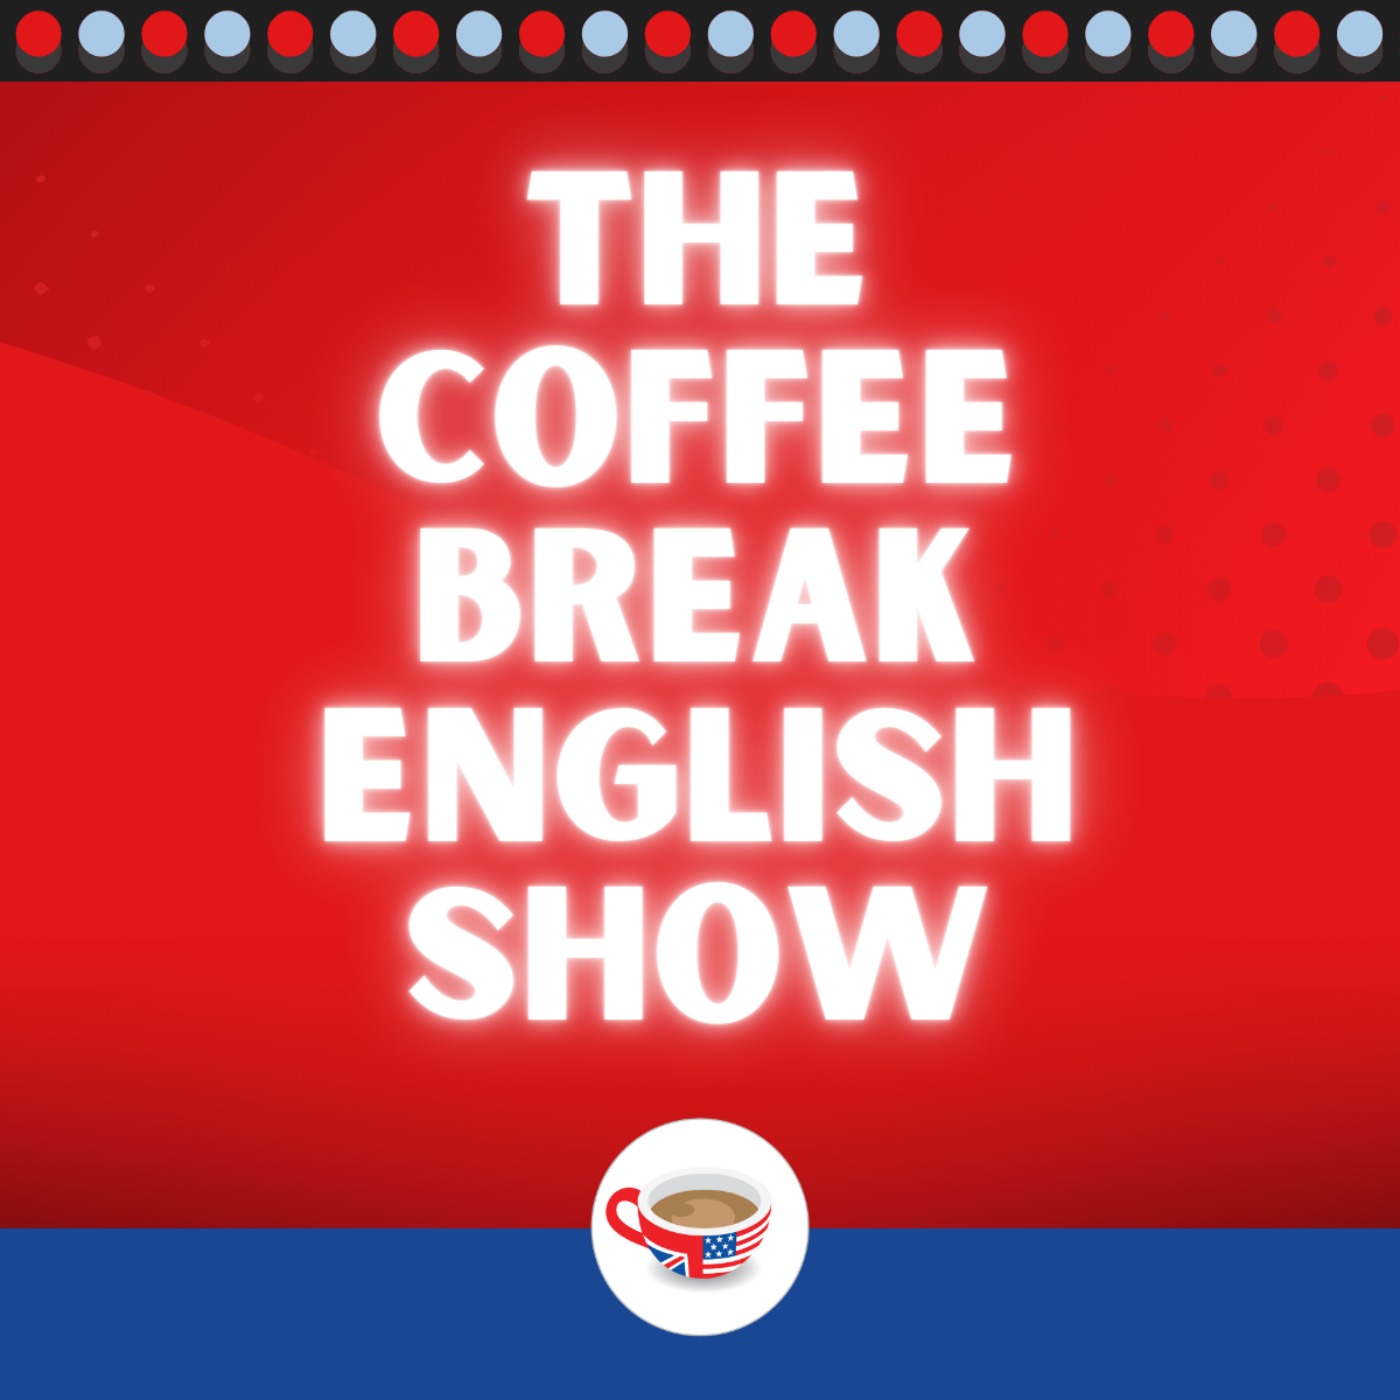 How to pronounce 'Tuesday' and 'Thursday' | The Coffee Break English Show 1.09